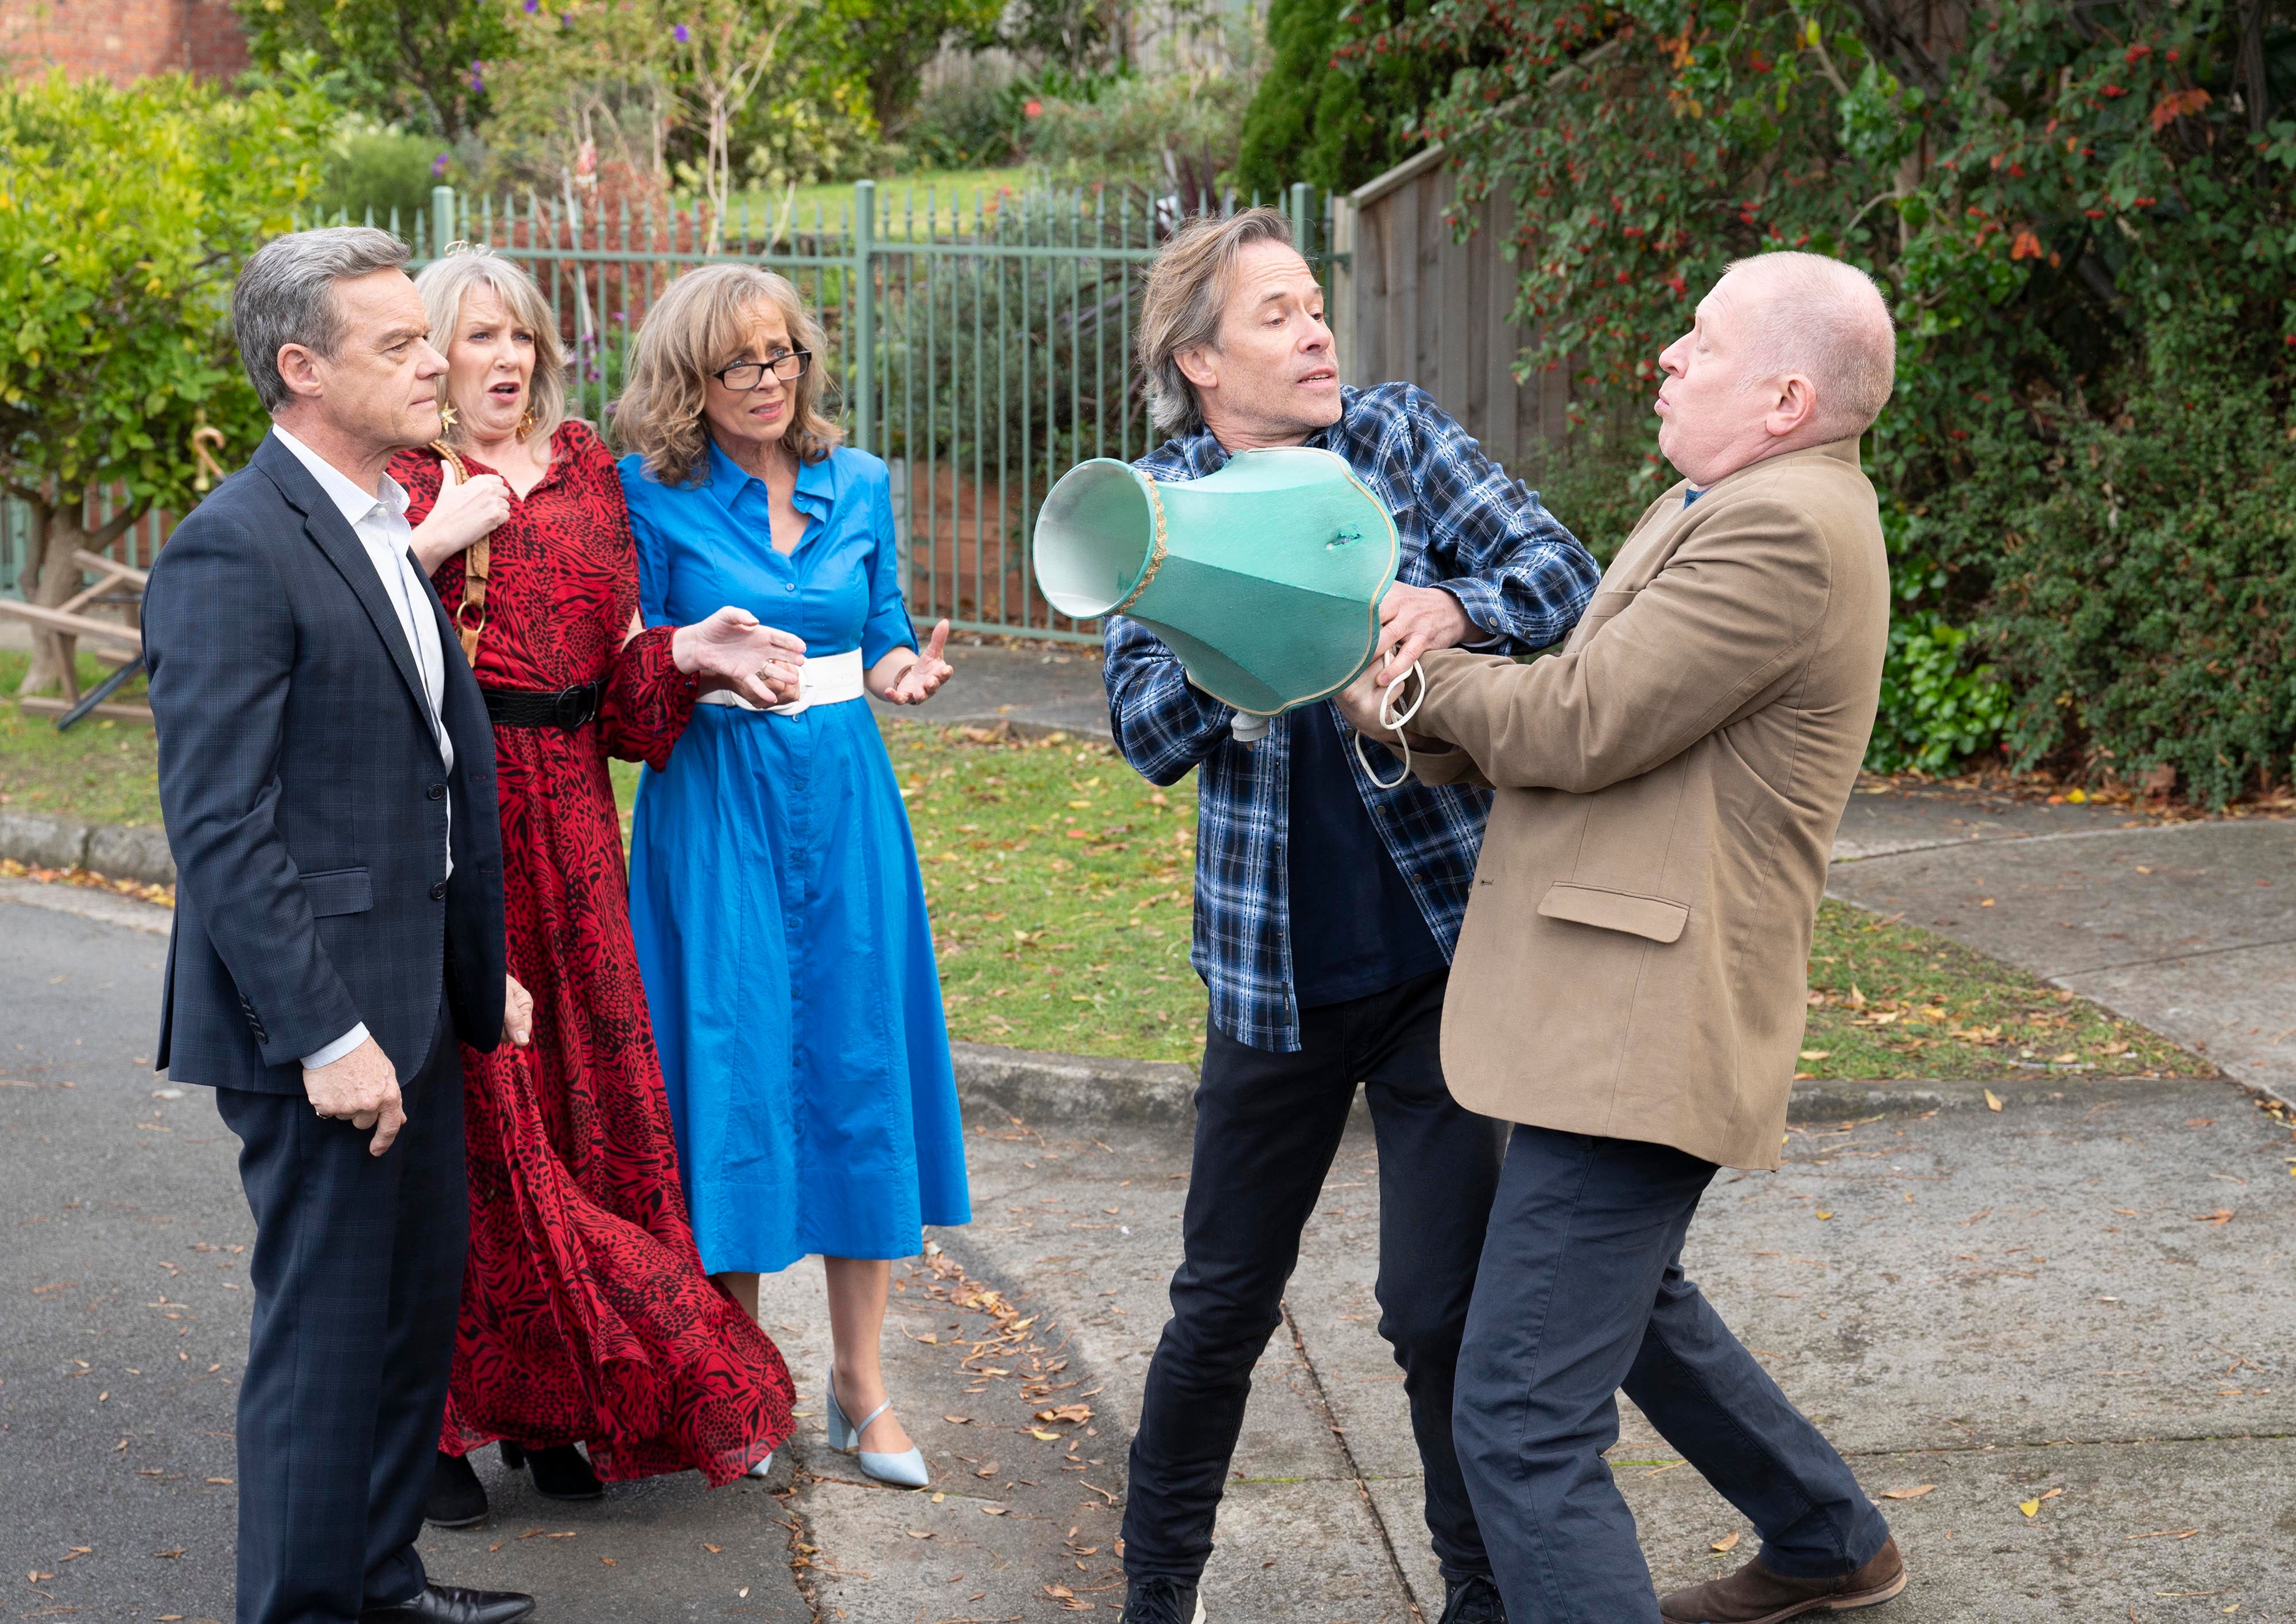 Neighbours 8902 14 Clive overreacts when he sees Mike with Jane 17 (Channel 5/PA)